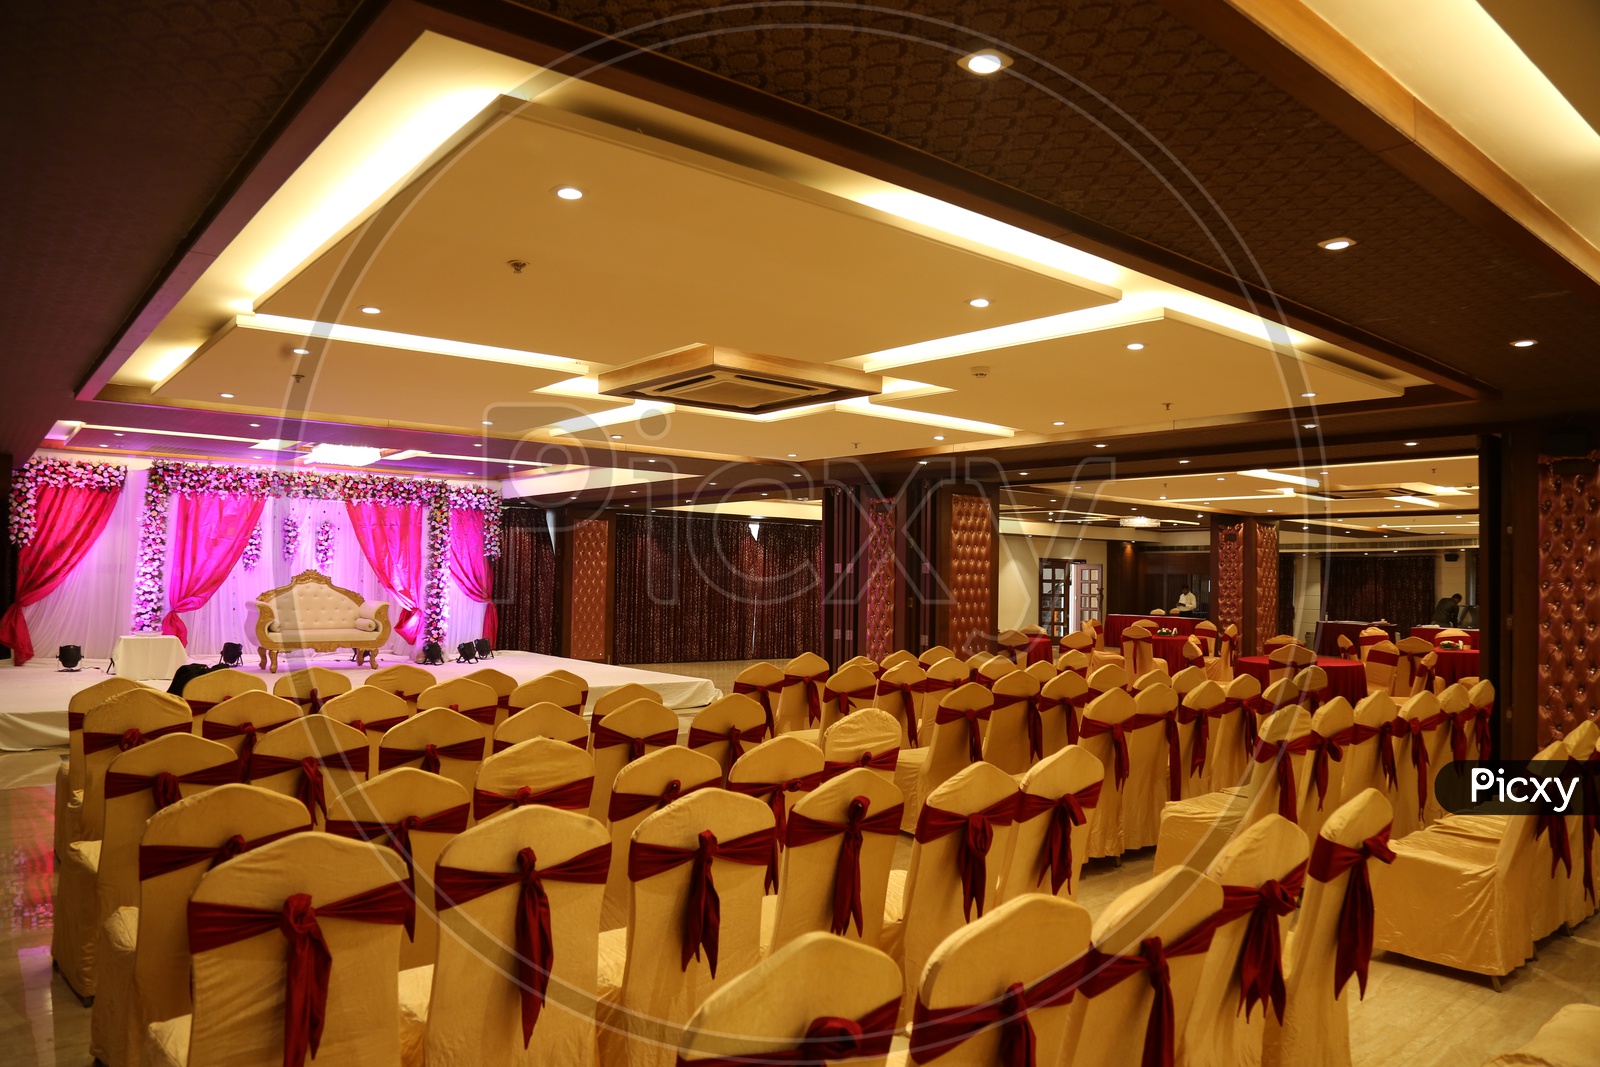 Seating arragement in a central A.C functional hall